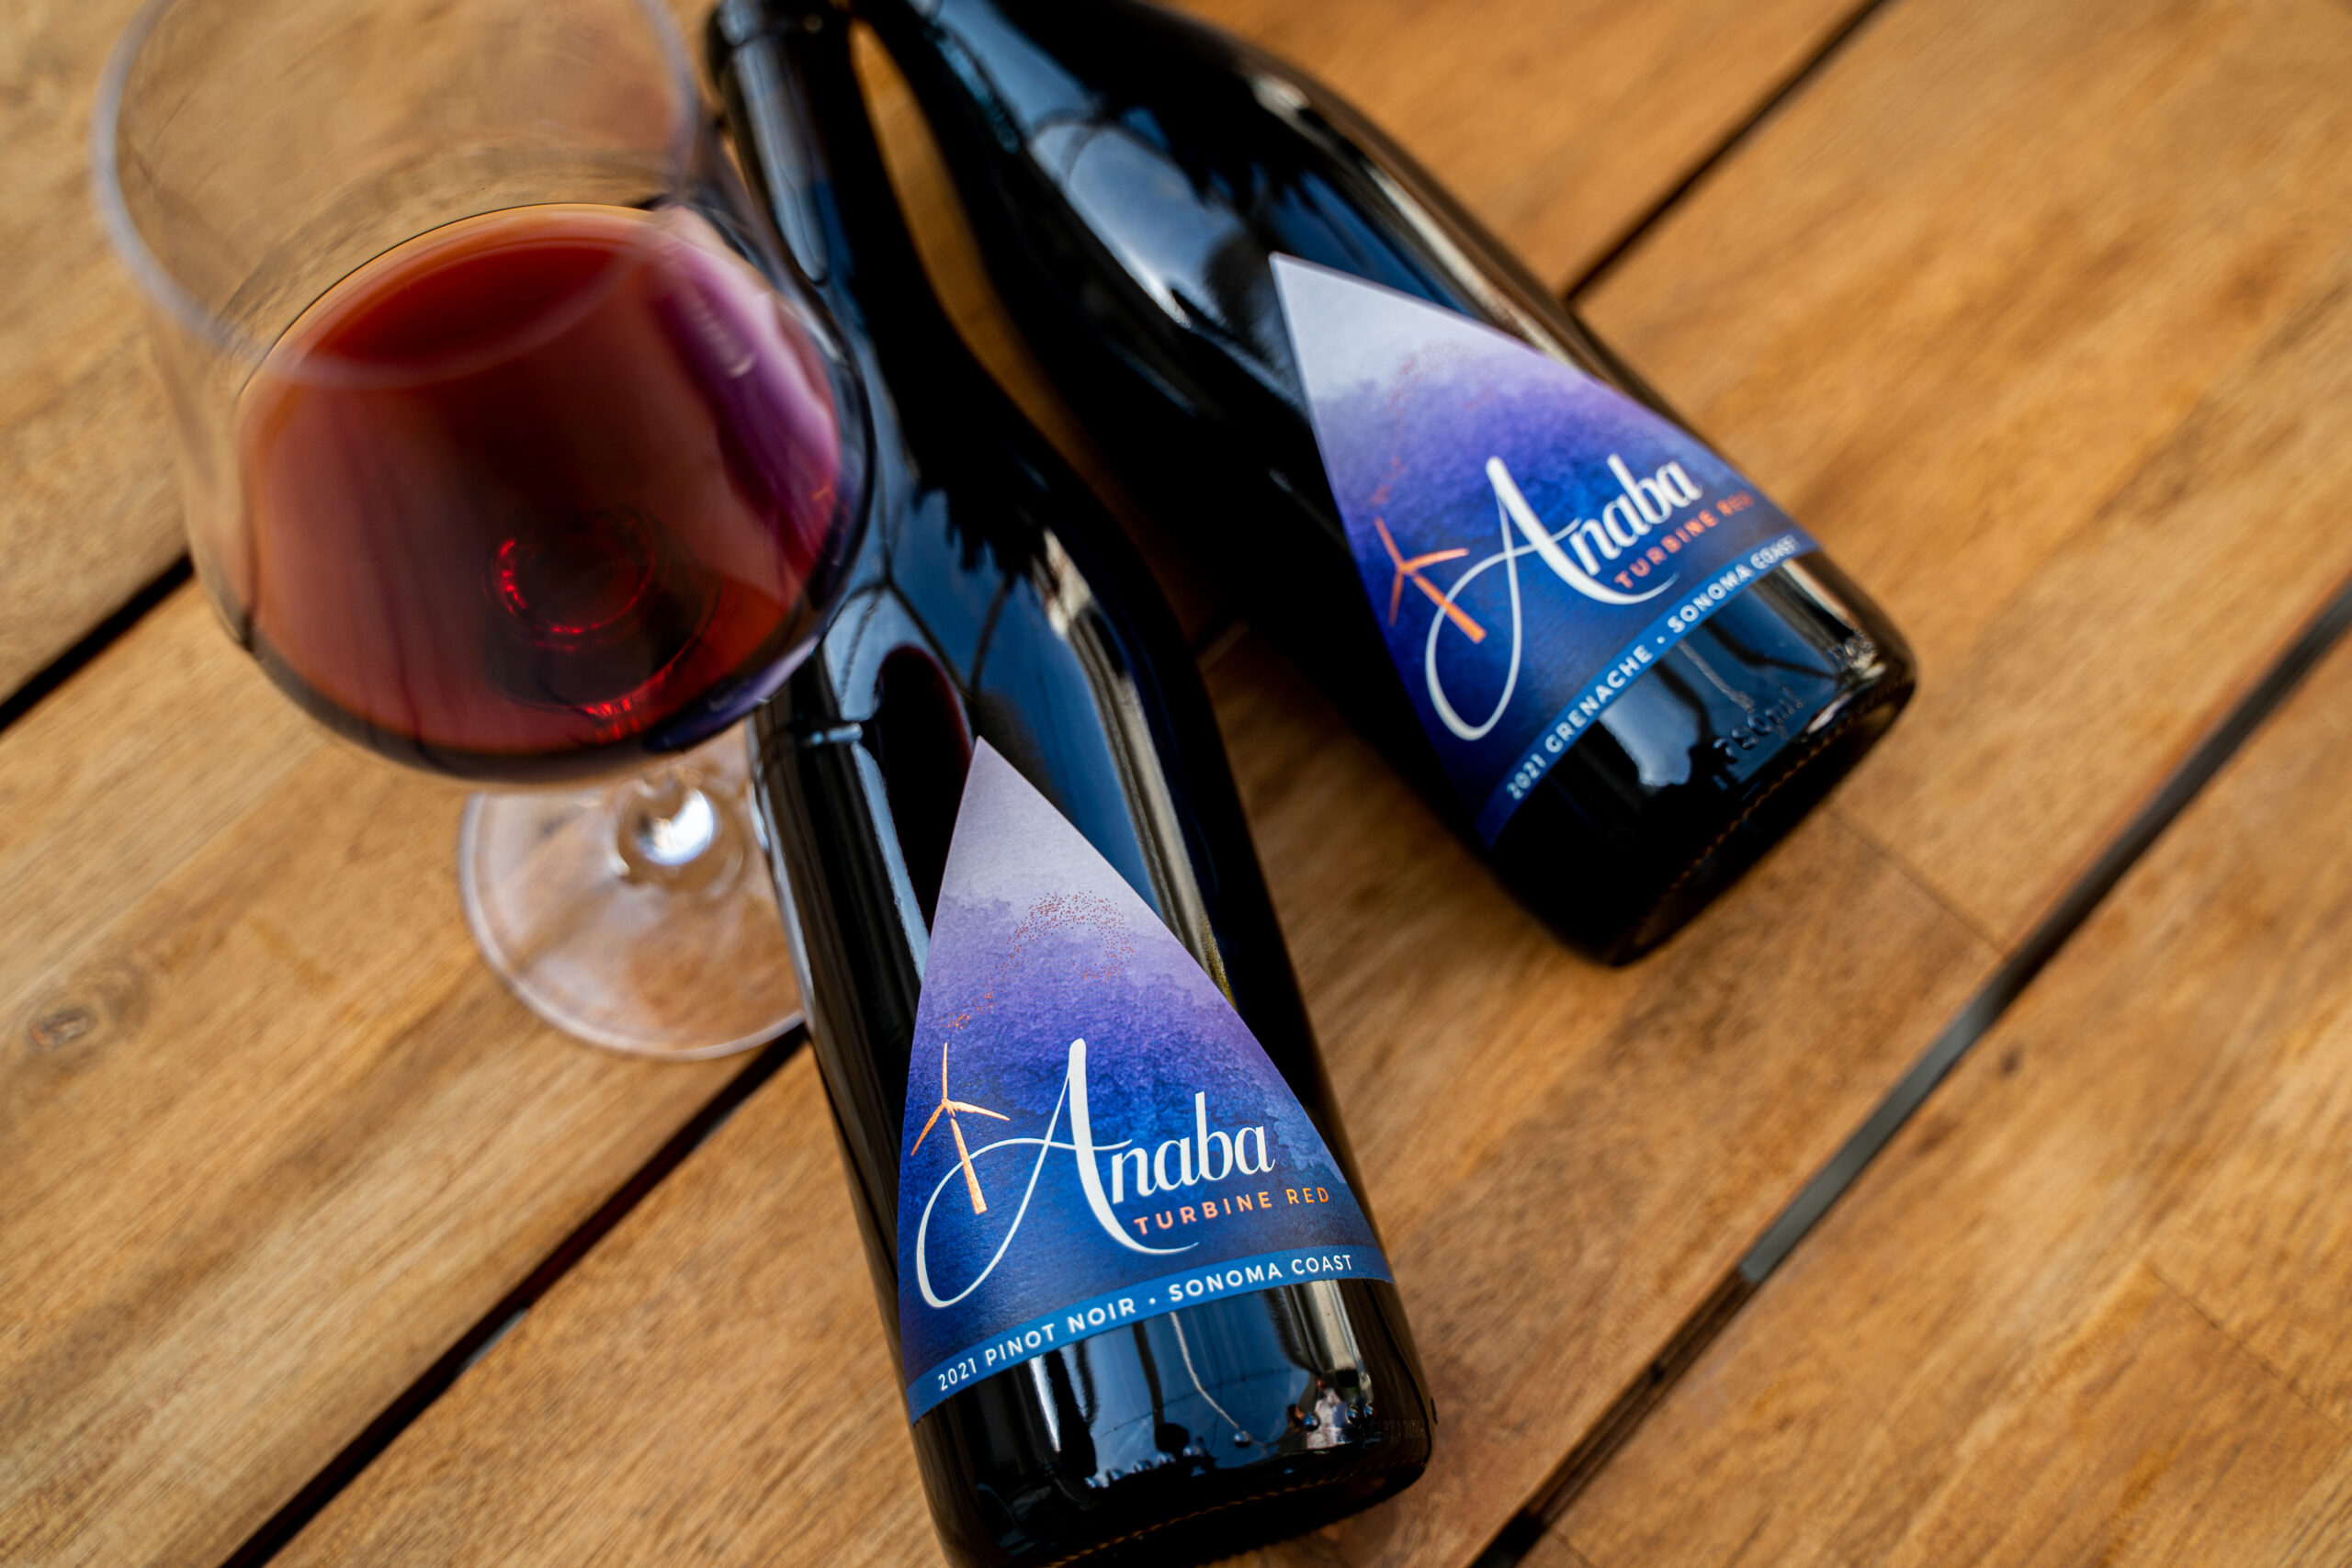 Turbine Grenache and Pinot Noir bottles with a glass of red on a table.